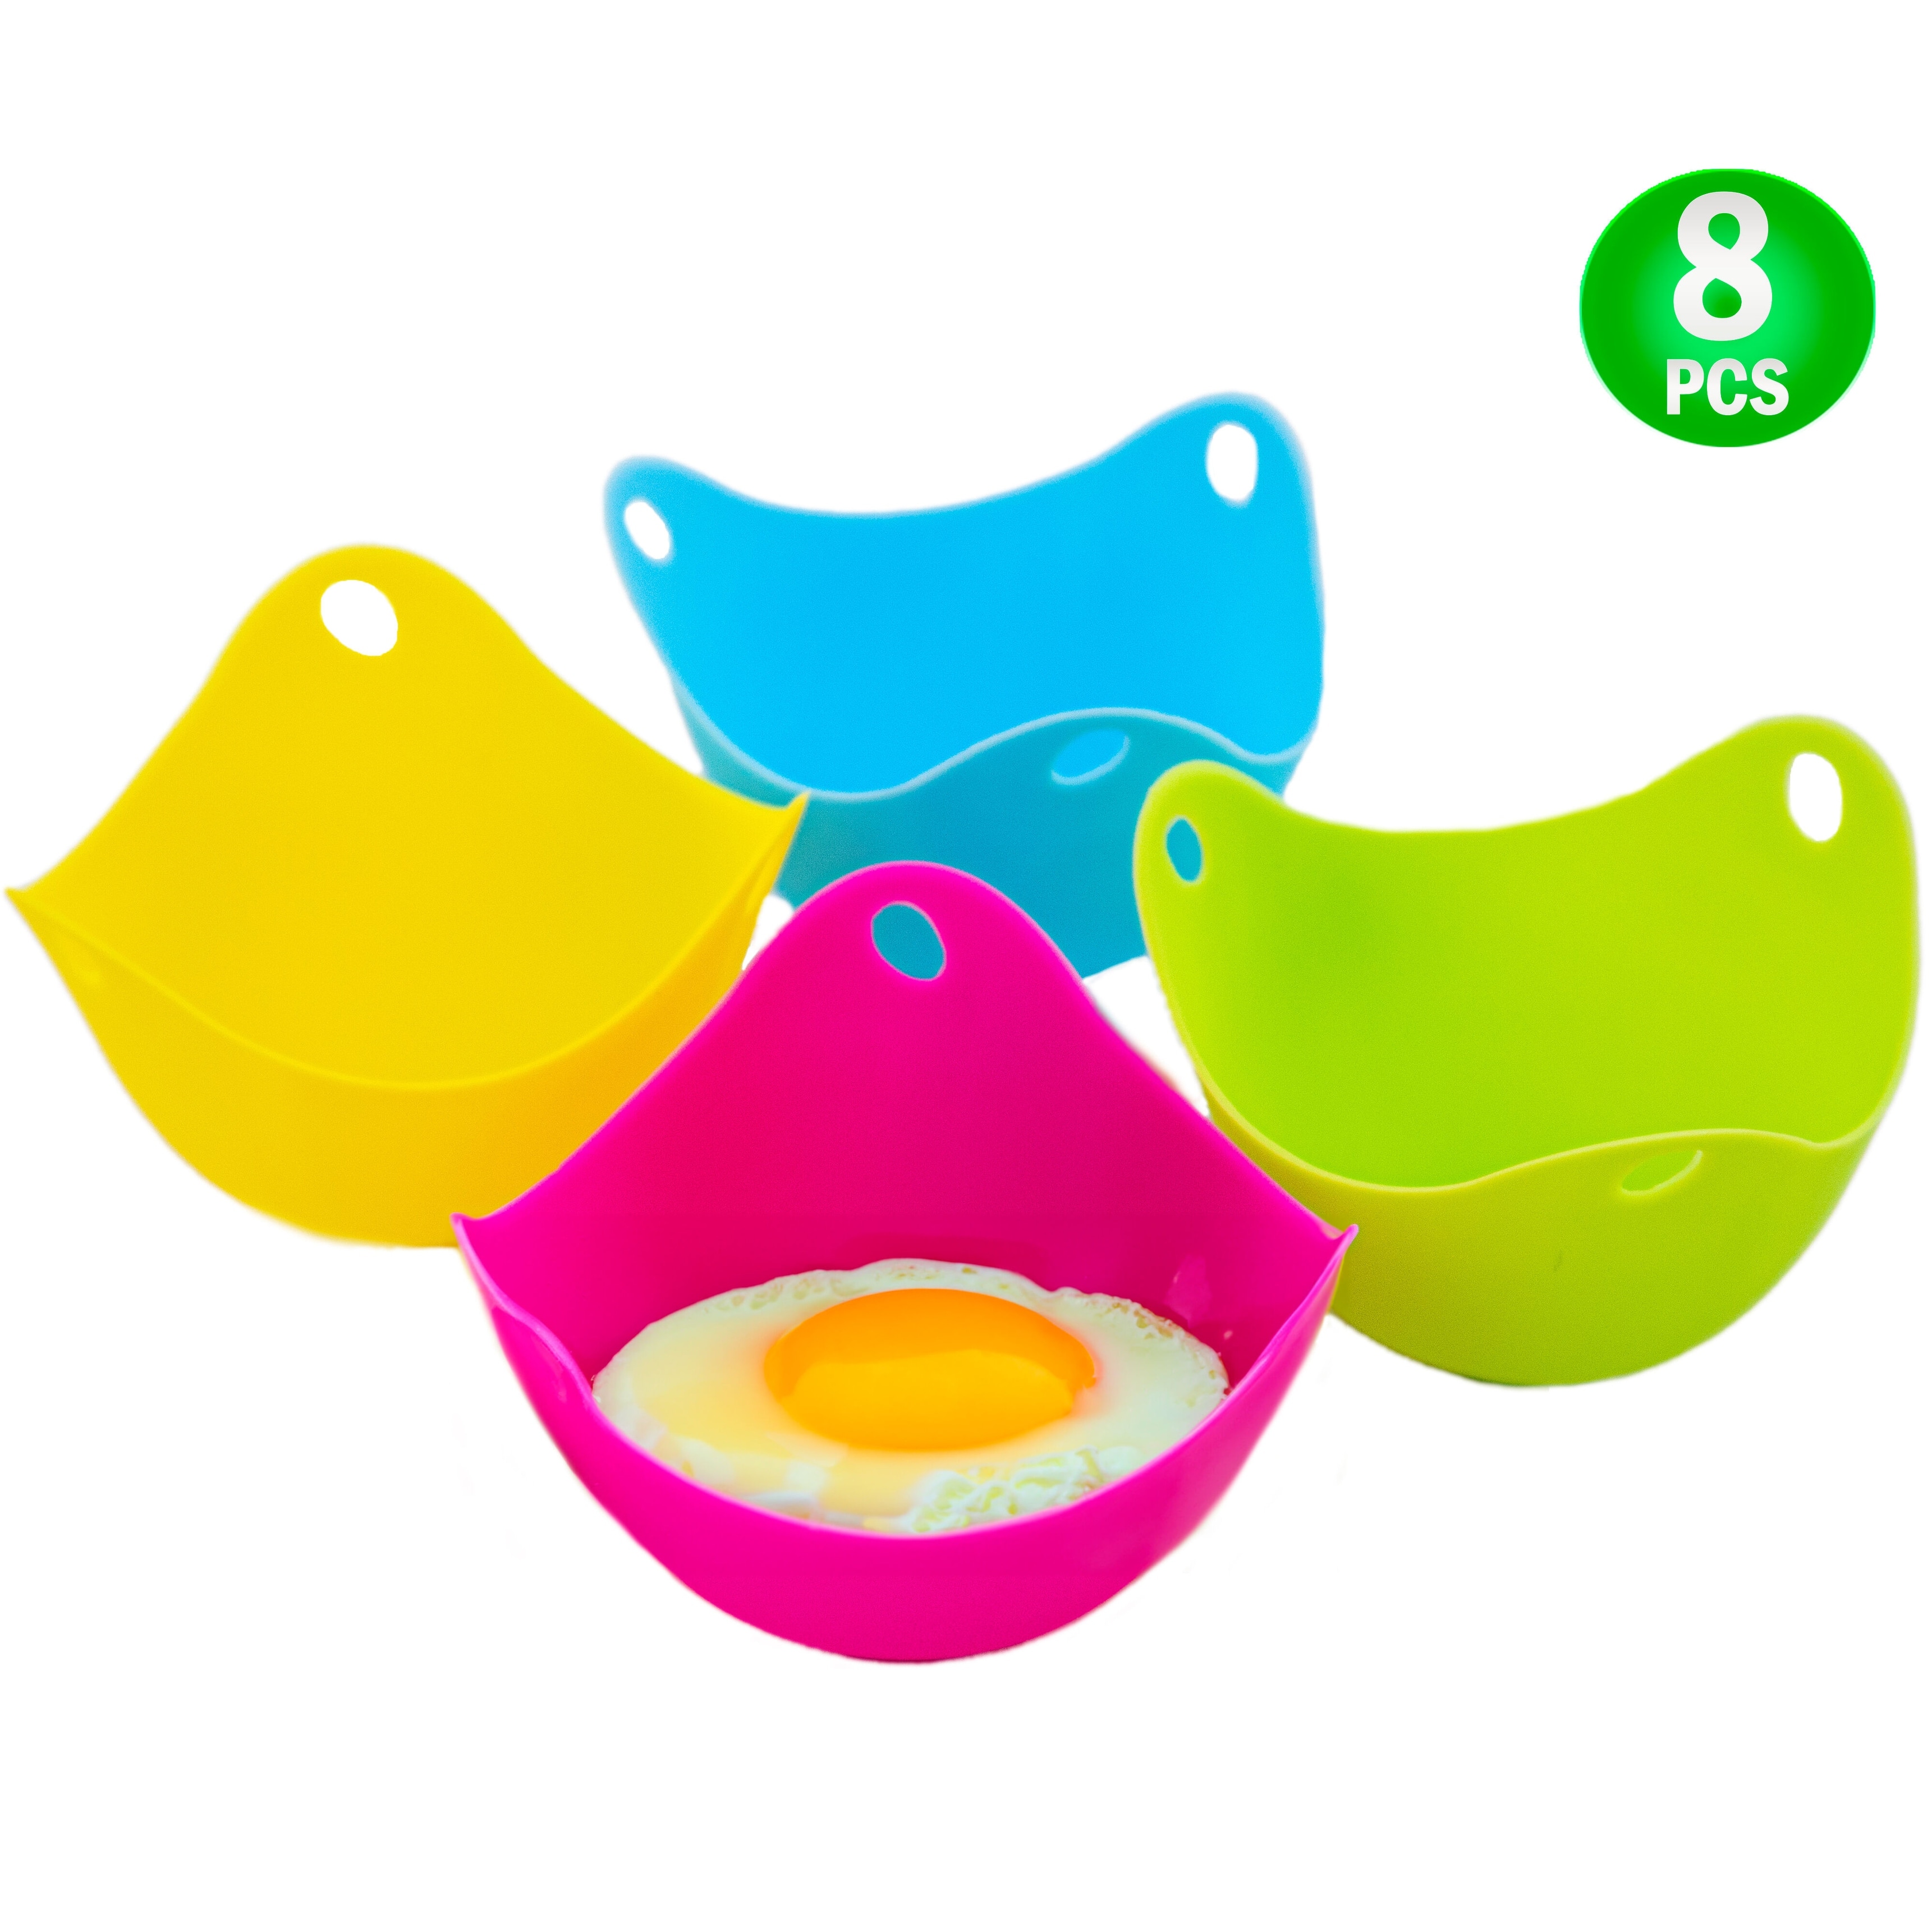 https://ak1.ostkcdn.com/images/products/is/images/direct/58663591e27efd97f23e60c97098766ac05aa02d/Egg-Poacher-Silicone-Cup-8pc-Set-Microwave-%26-Stovetop-Boiler-Safe-Poached-Eggs.jpg